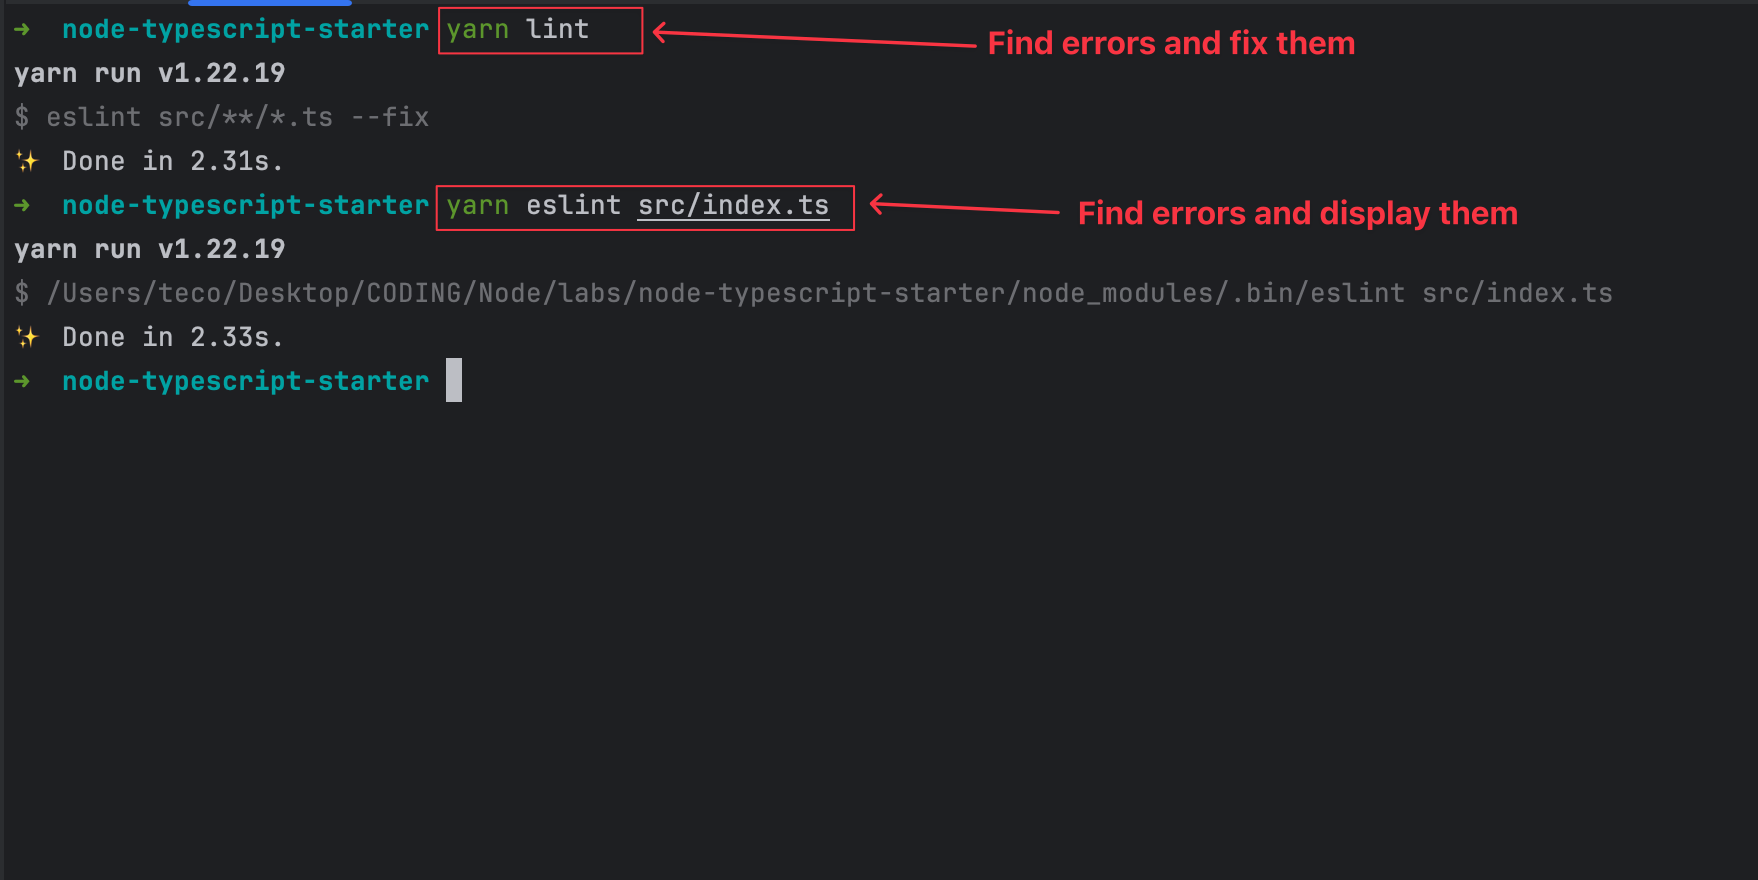 Check ESLint errors in files and fix them.